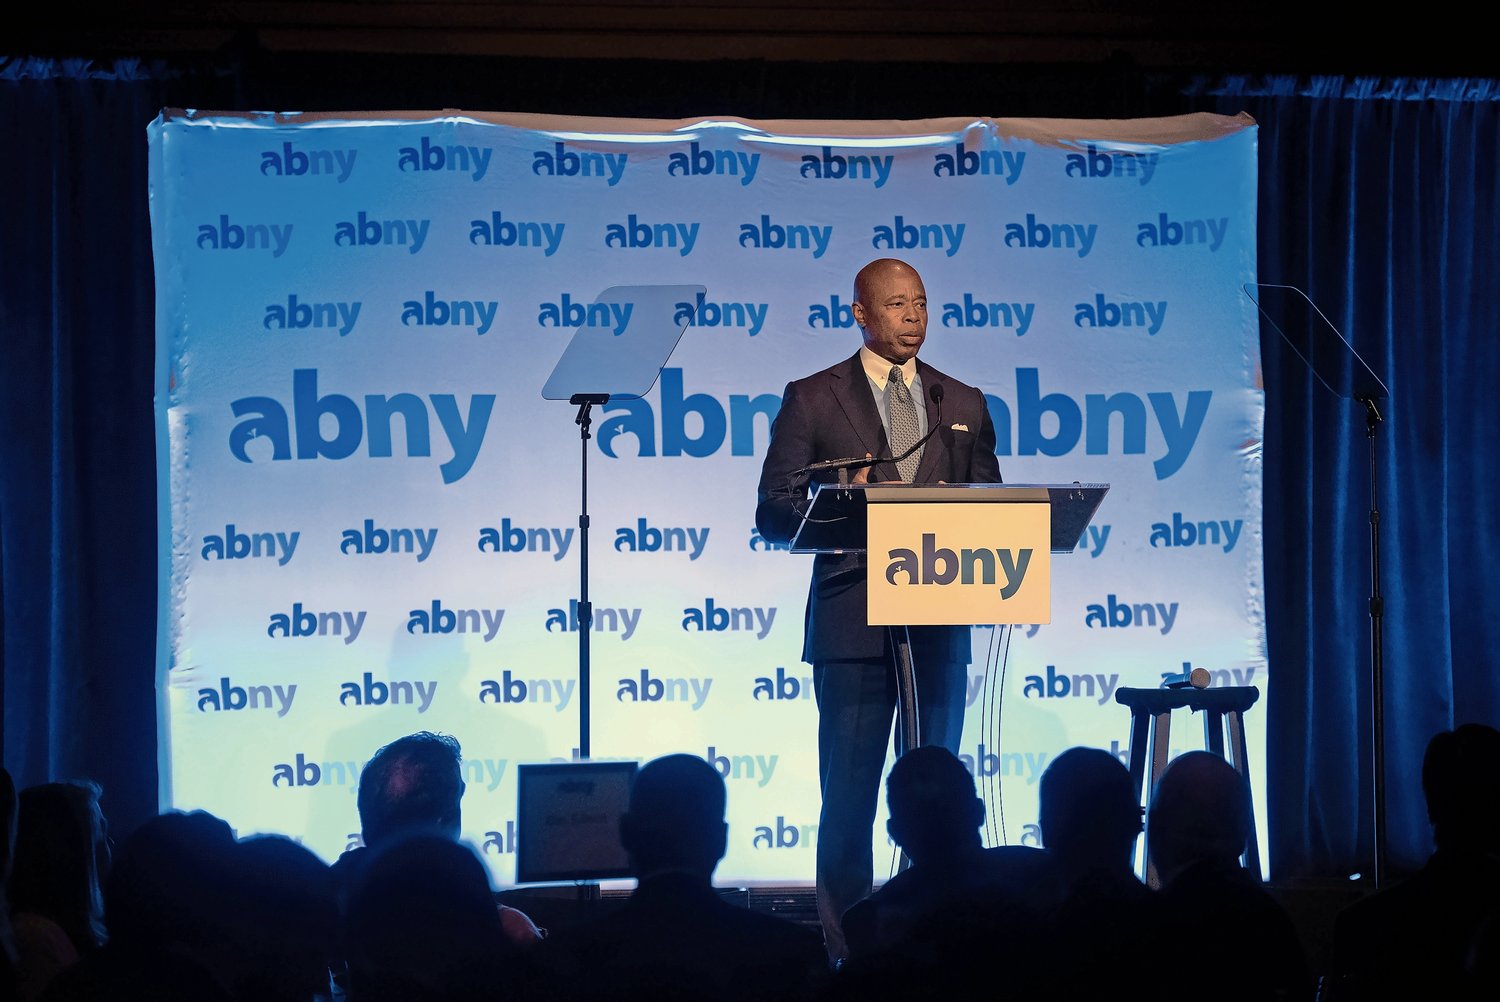 New York City Mayor Eric Adams delivers remarks the at the Association for a Better New York's (ABNY) power breakfast at Cipriani Wall Street, June 1. Last week he announced a crackdown on illegal license plates.